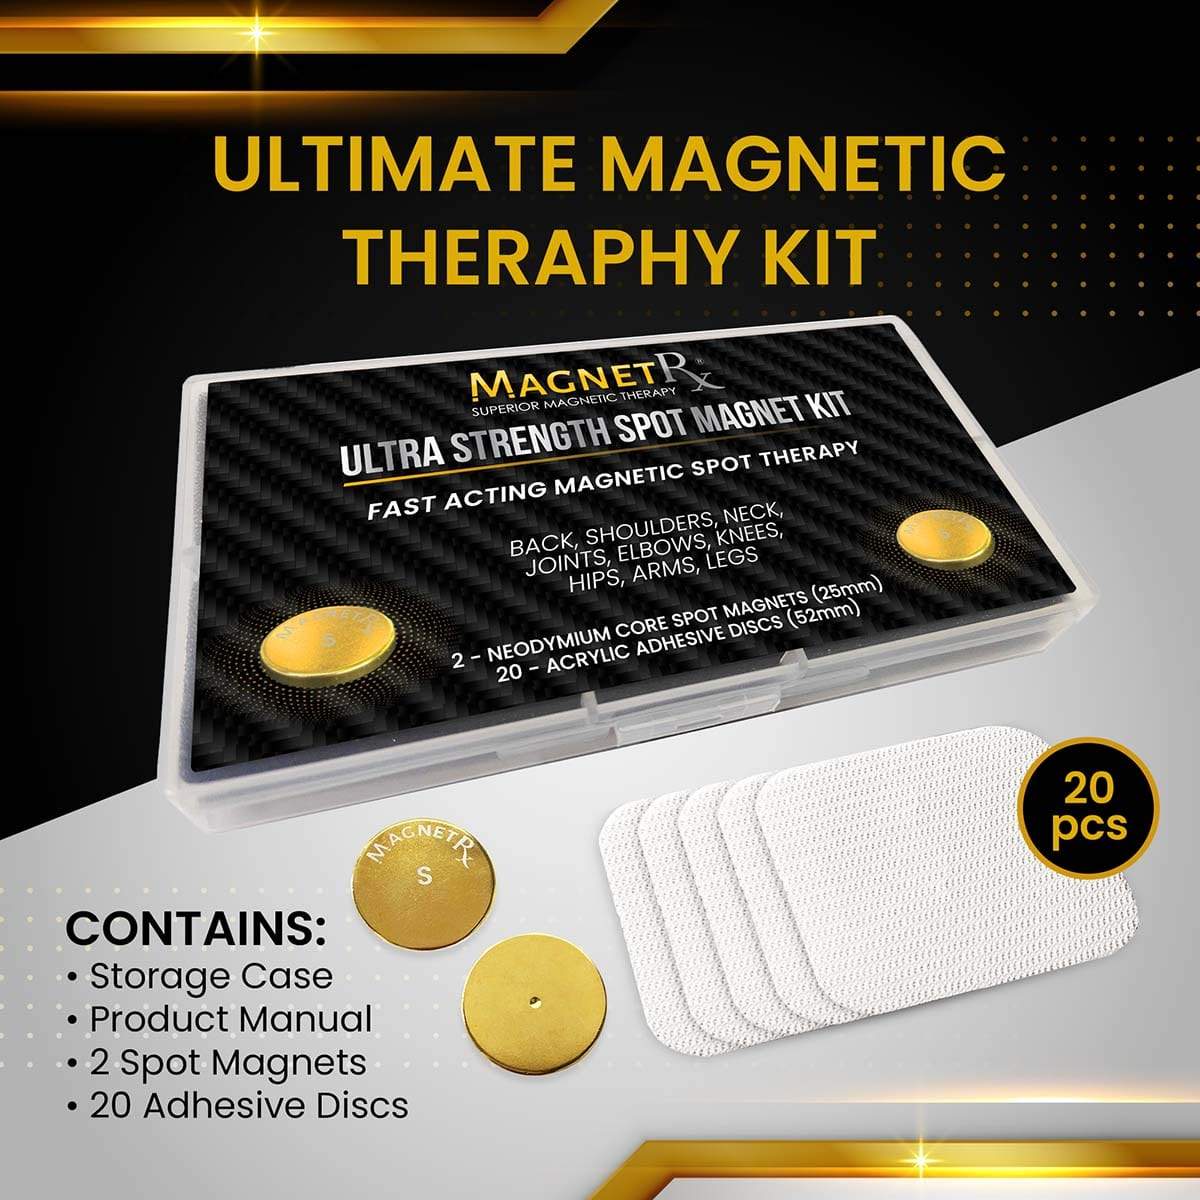 magnetrx-magnetic-patch-magnetic-therapy-spot-magnet-kit-29099495784529_1200x